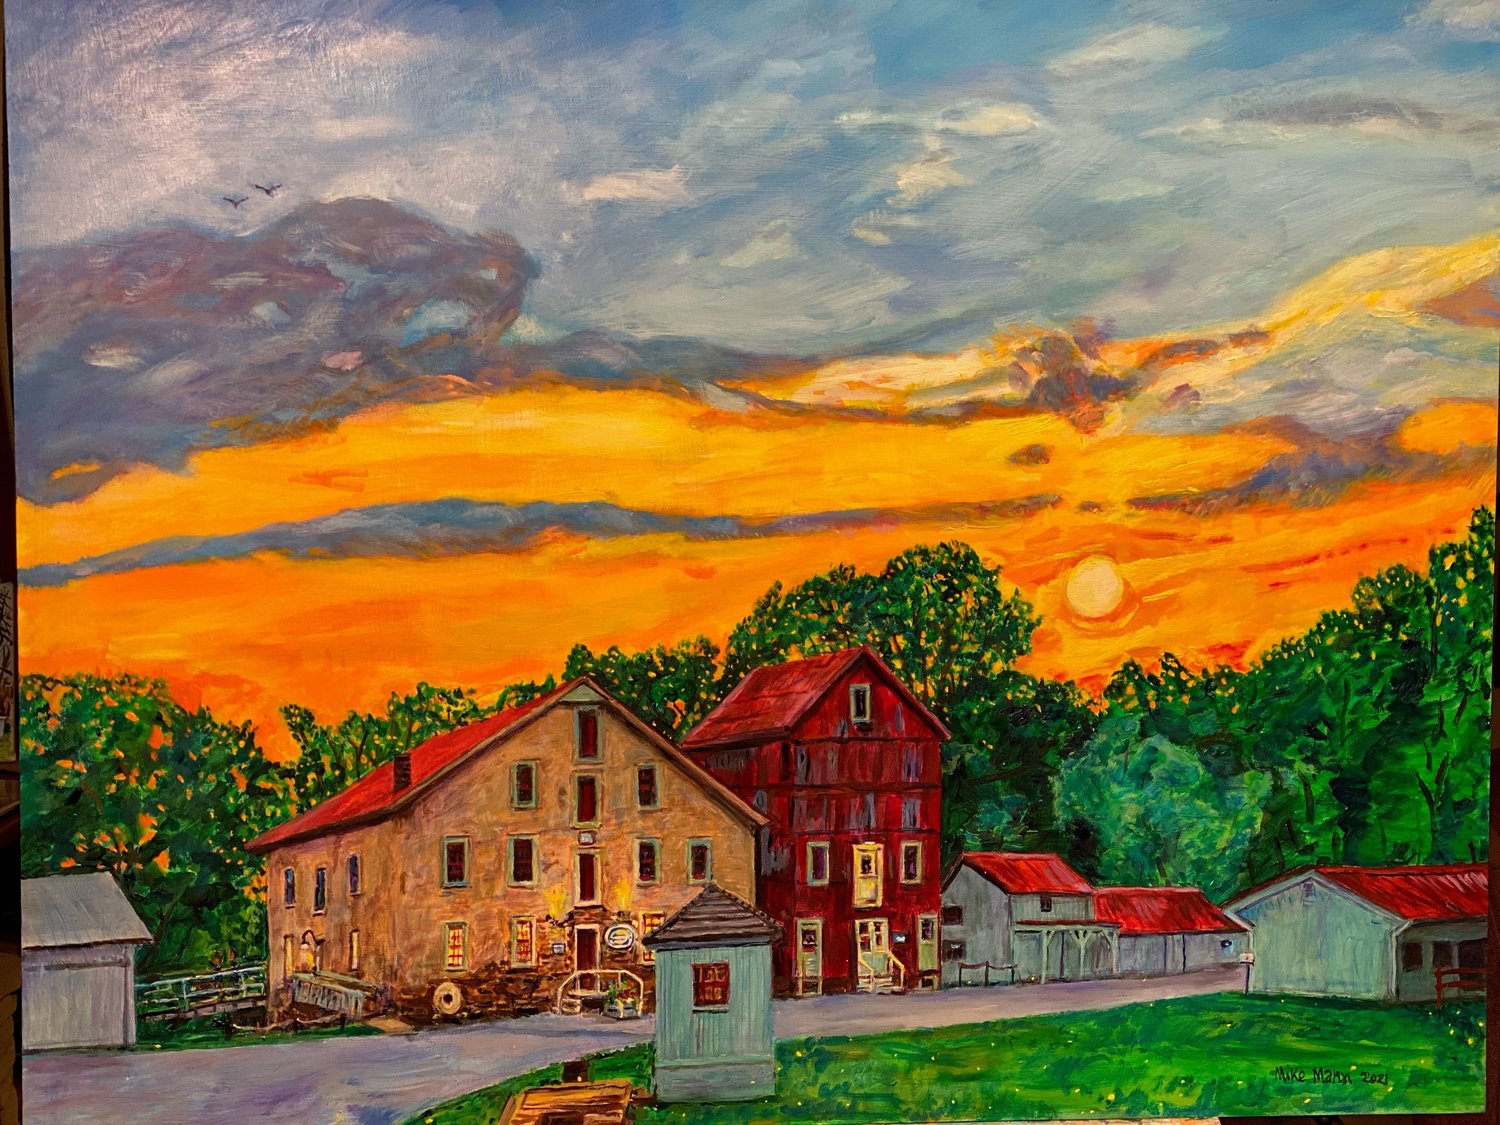 “Prallsville Sunset” is an oil painting by Mike Mann.